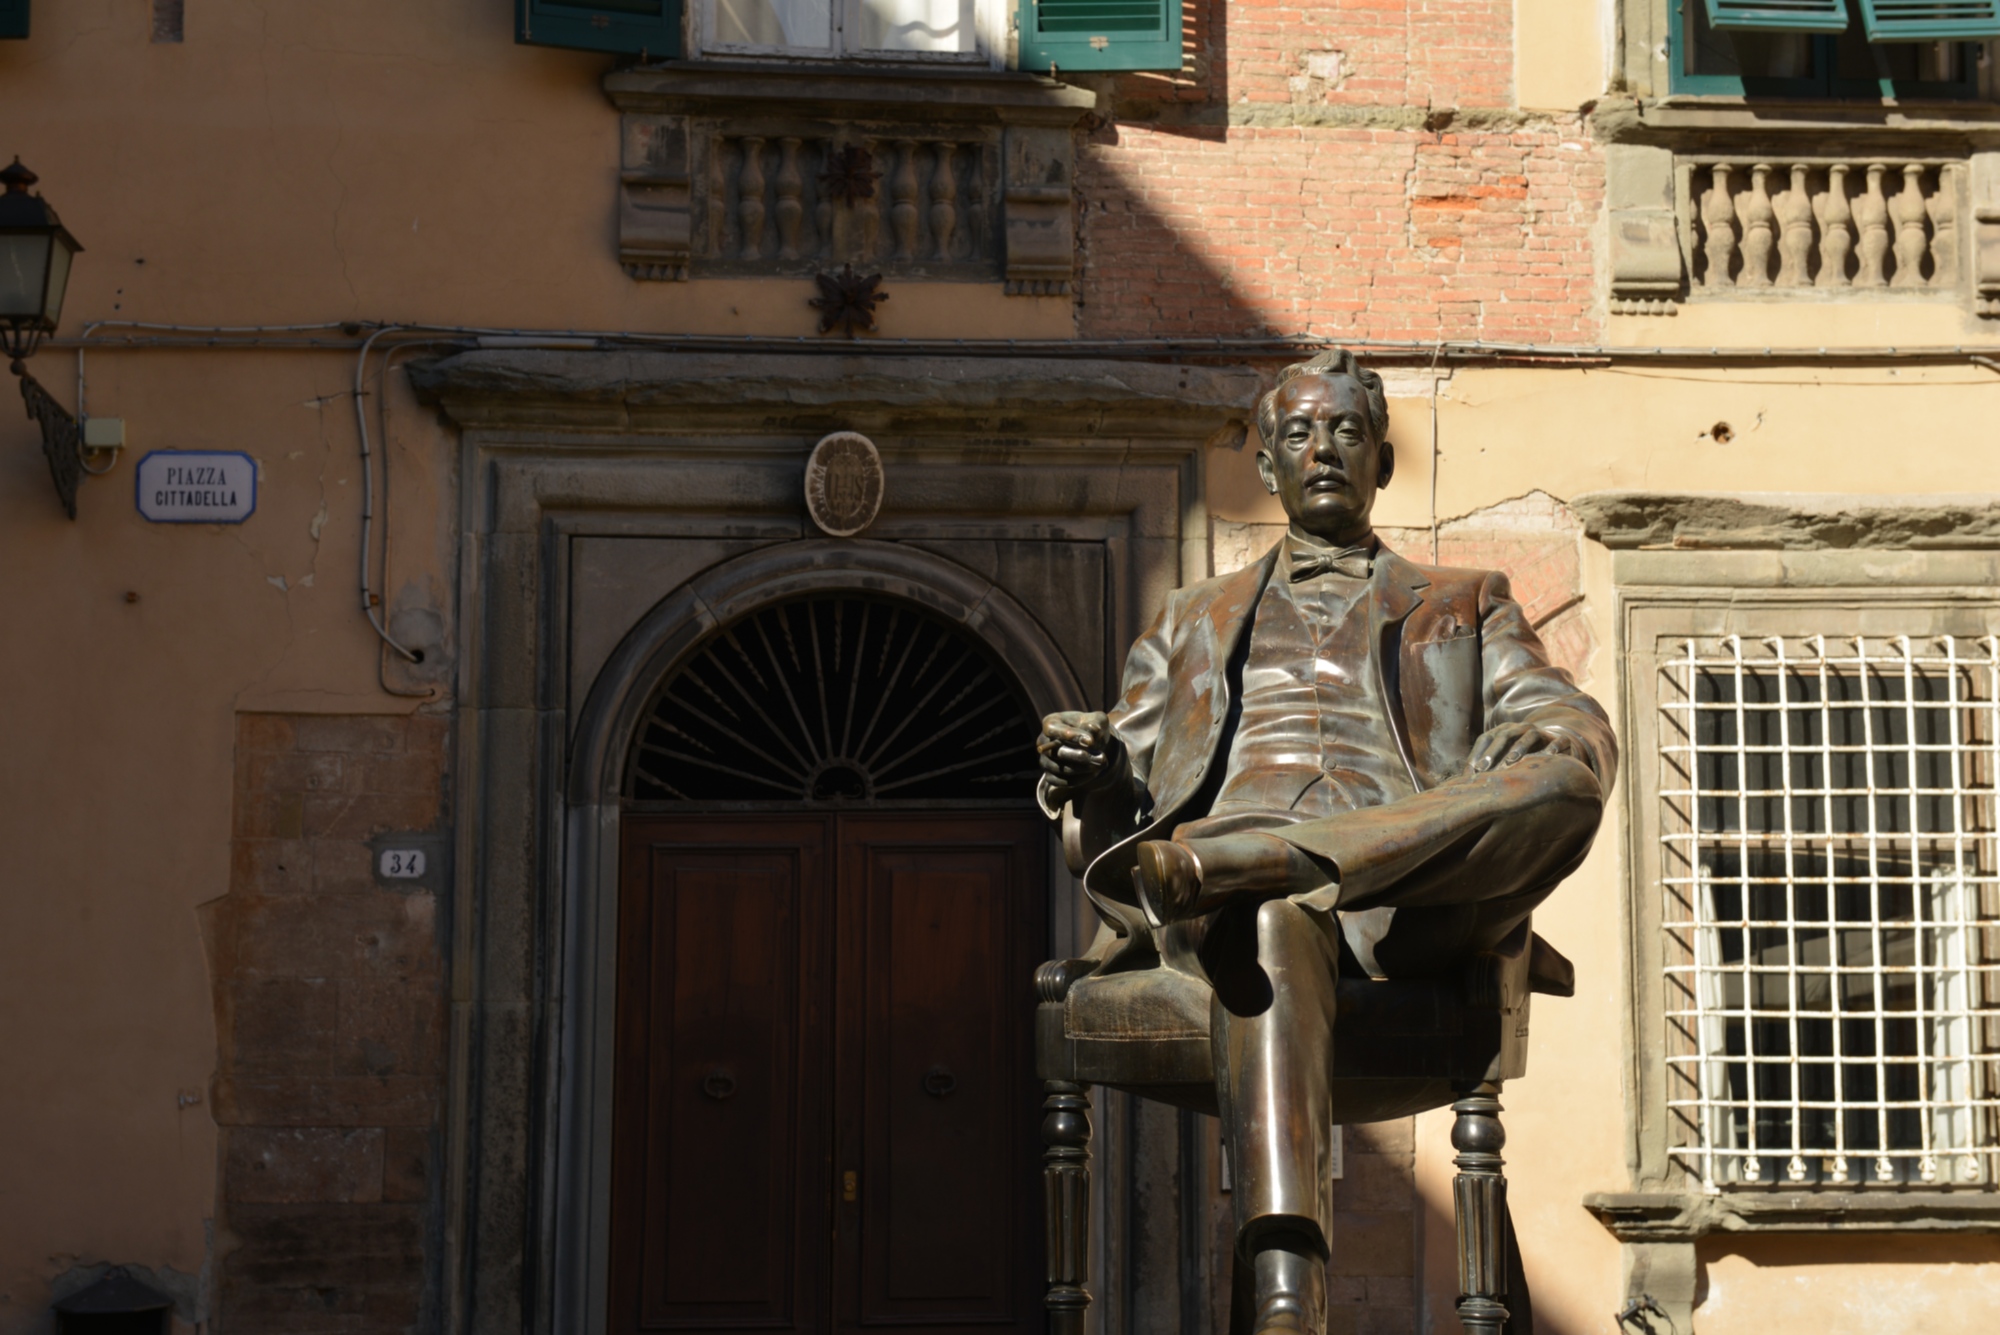 Statue of Giacomo Puccini in Lucca